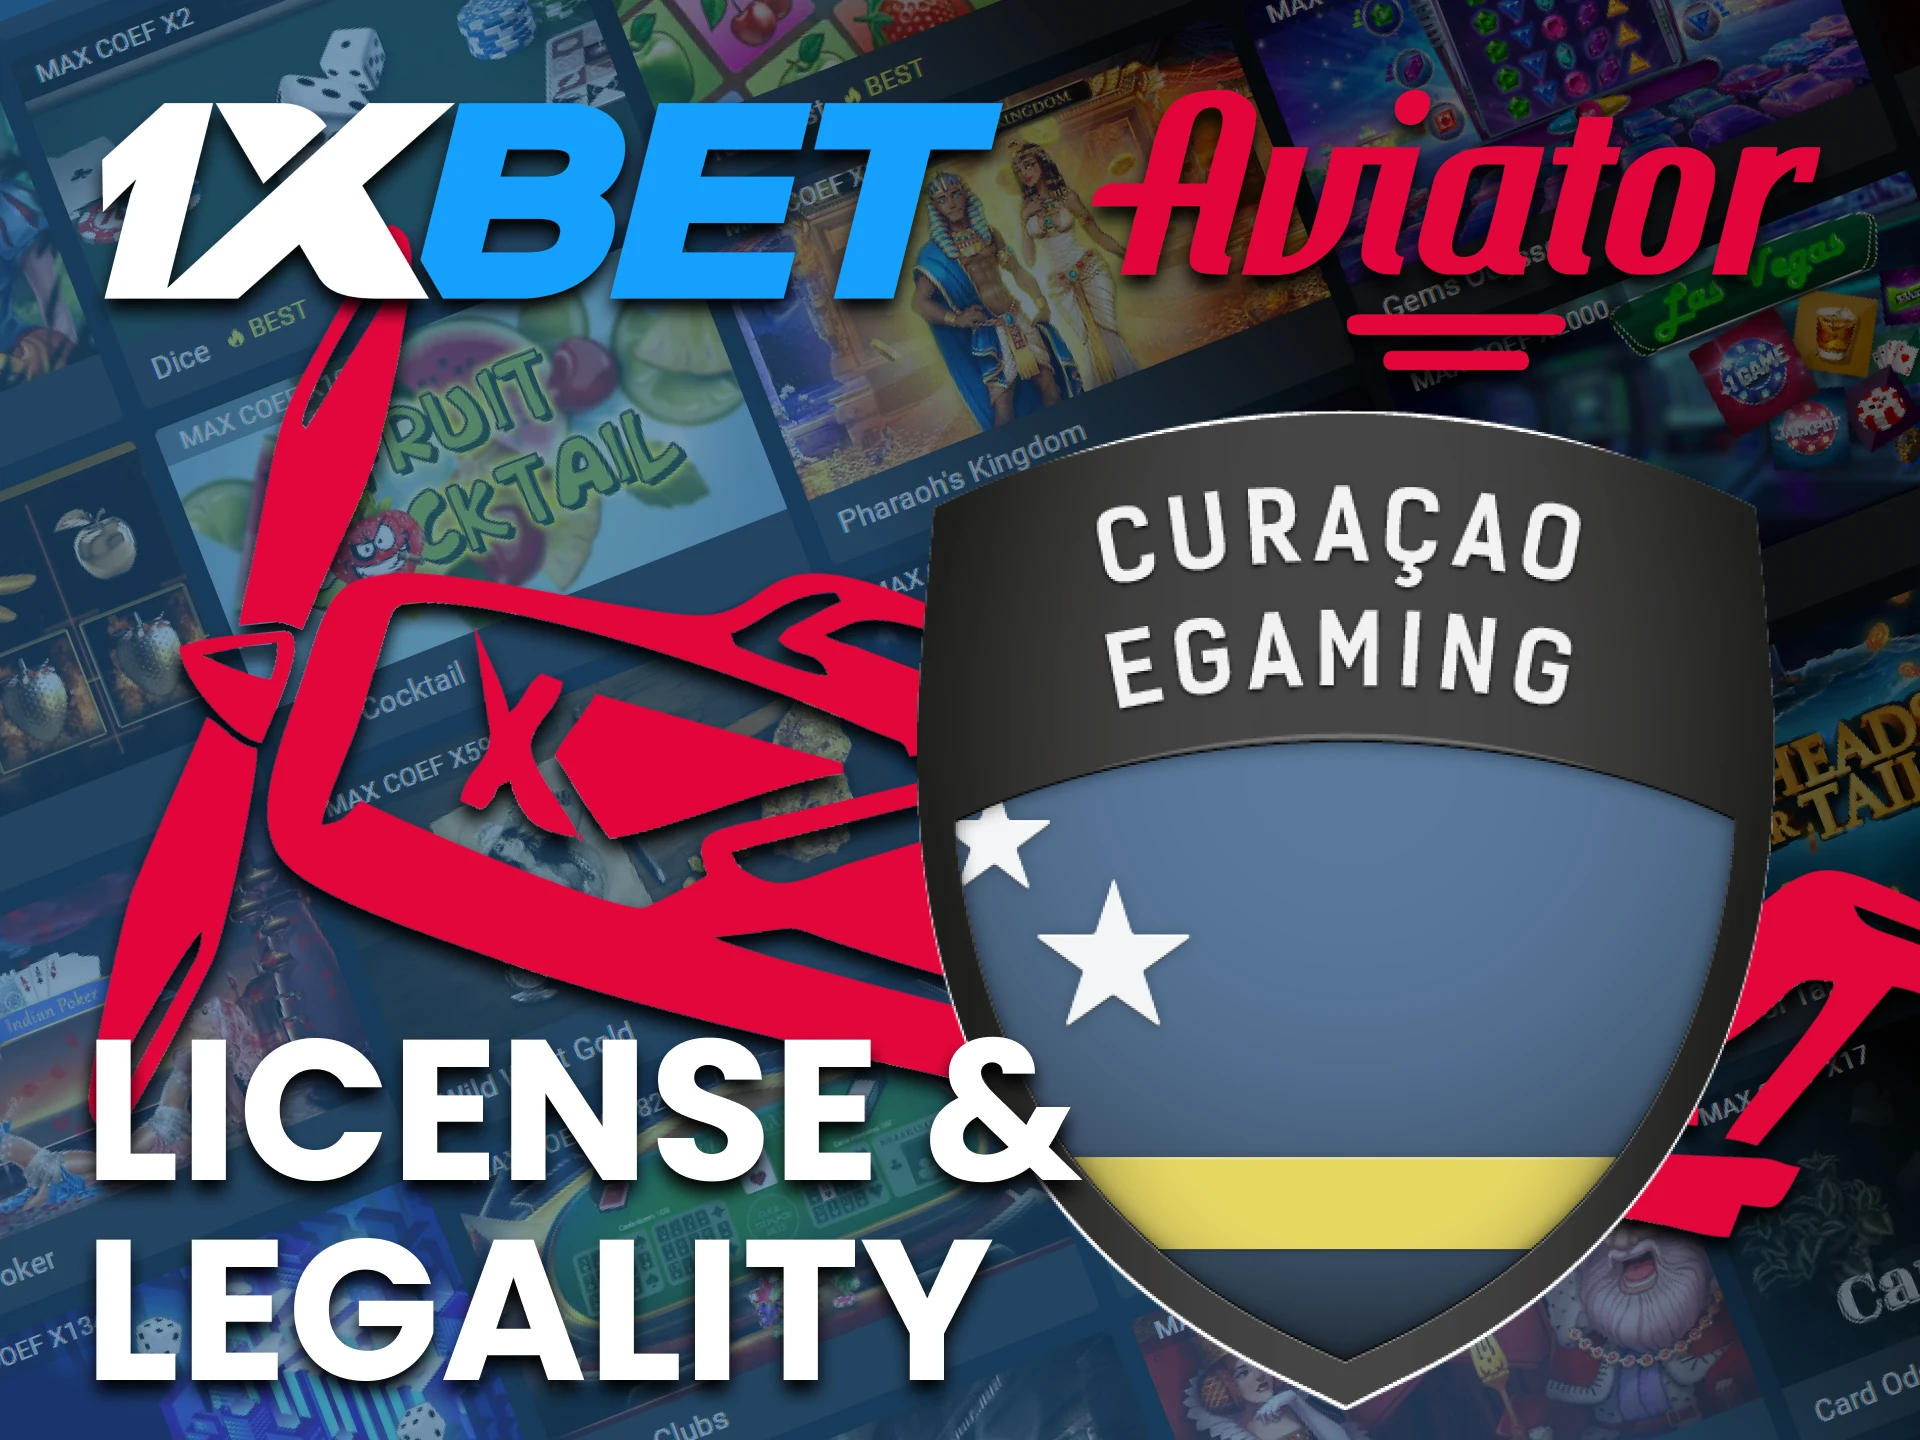 1xbet provides gambling services thanks to the Curacao license.